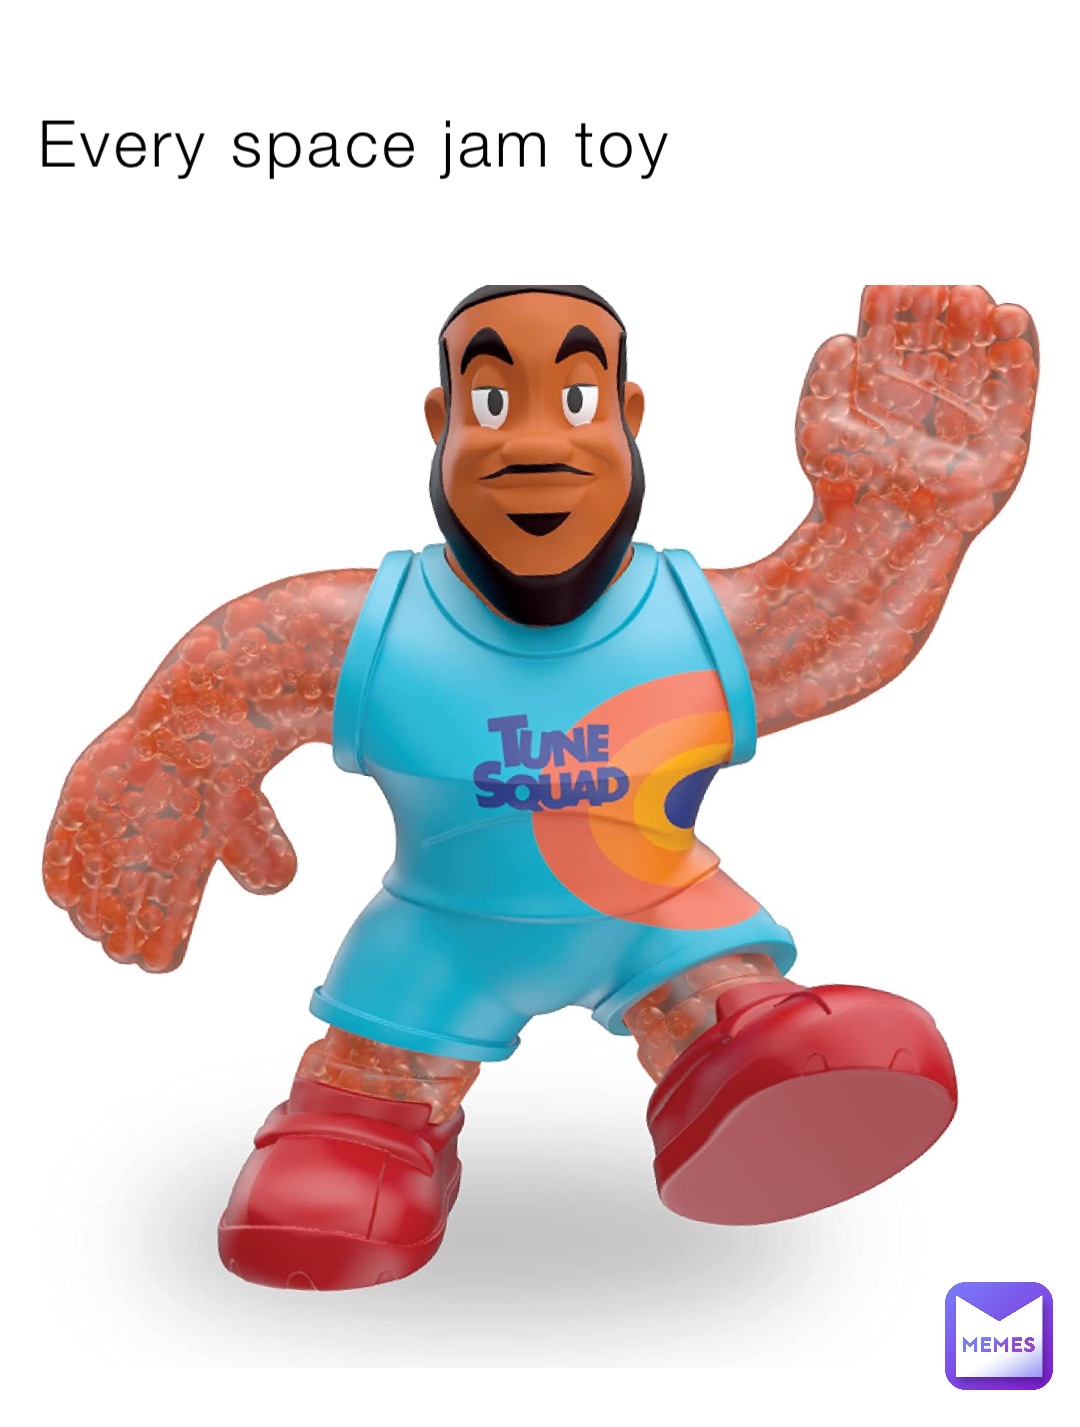 Every space jam toy | @Henry_Newkirk | Memes